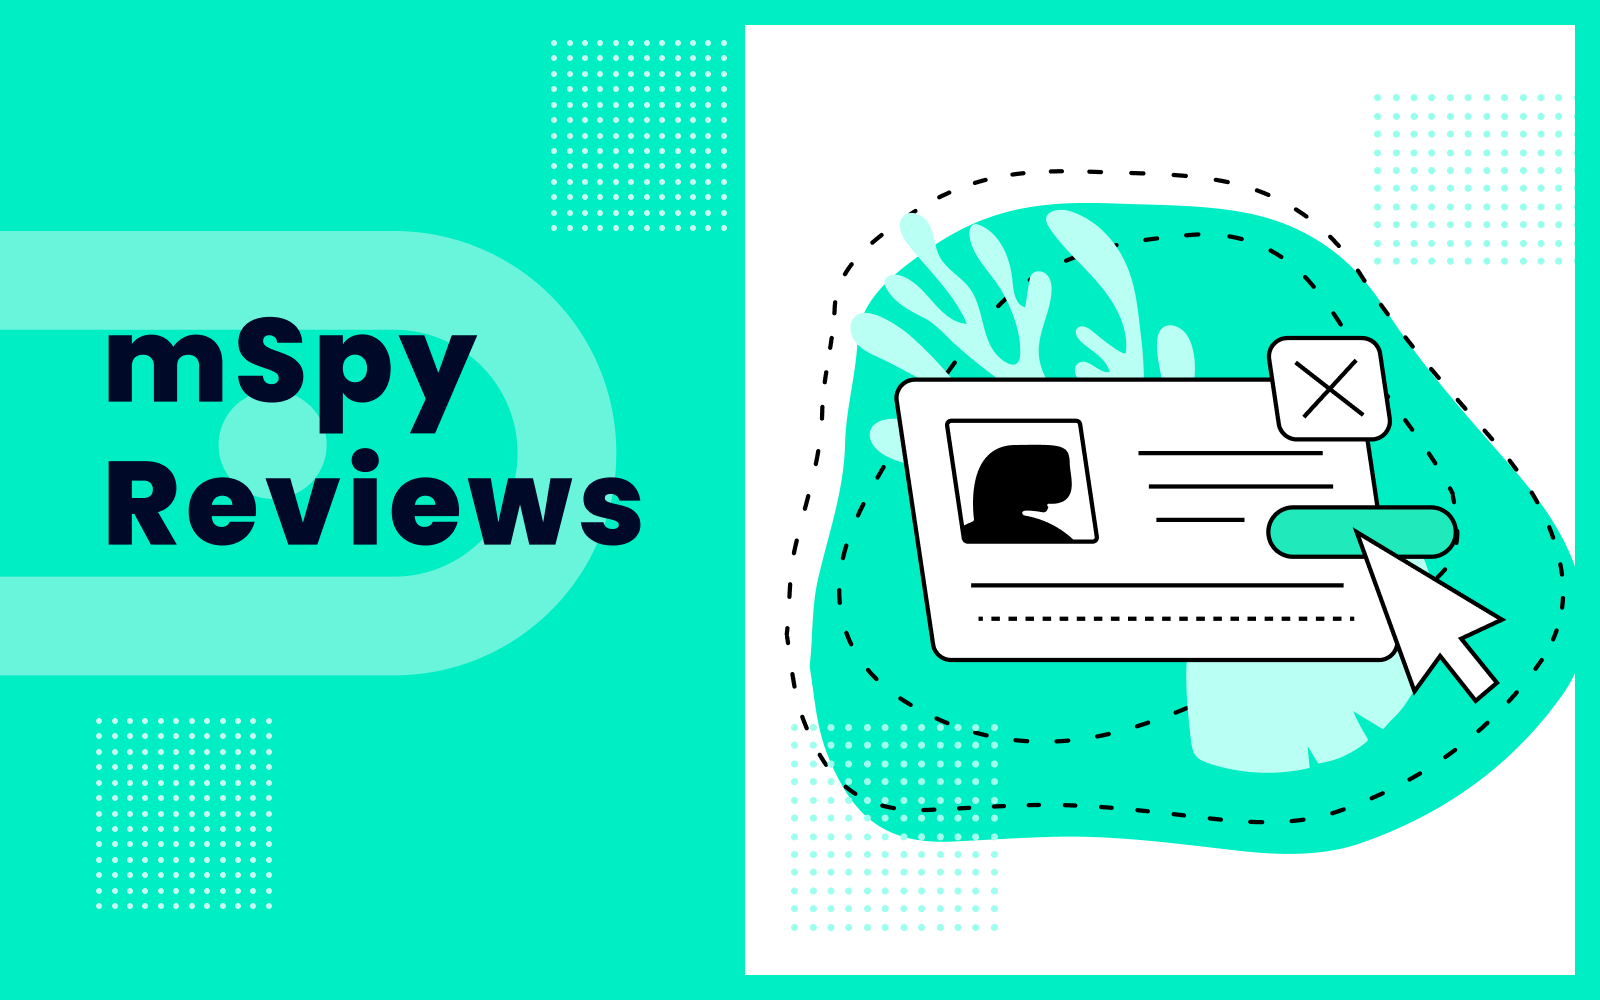 
mSpy Reviews 2022: Is It Worth Buying?
